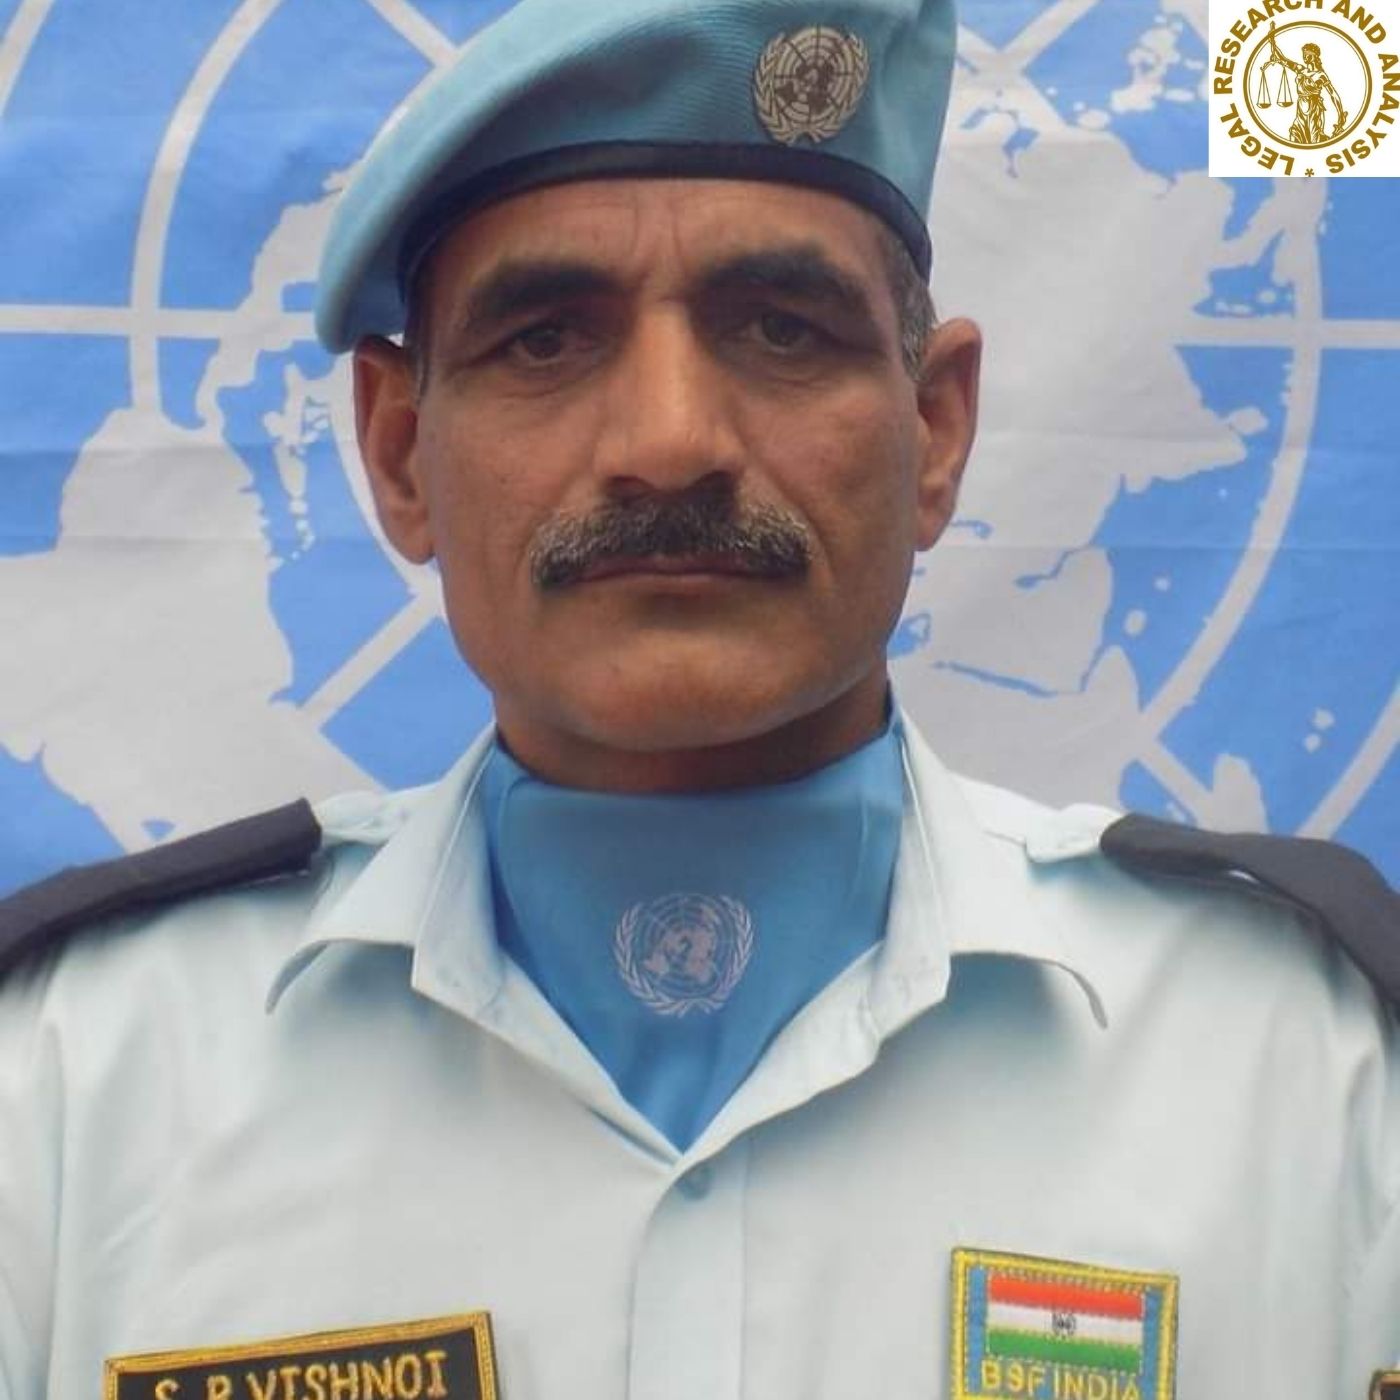 Two BSF personnel serving on United NationsÂ peacekeeping duty in the Congo were killed.